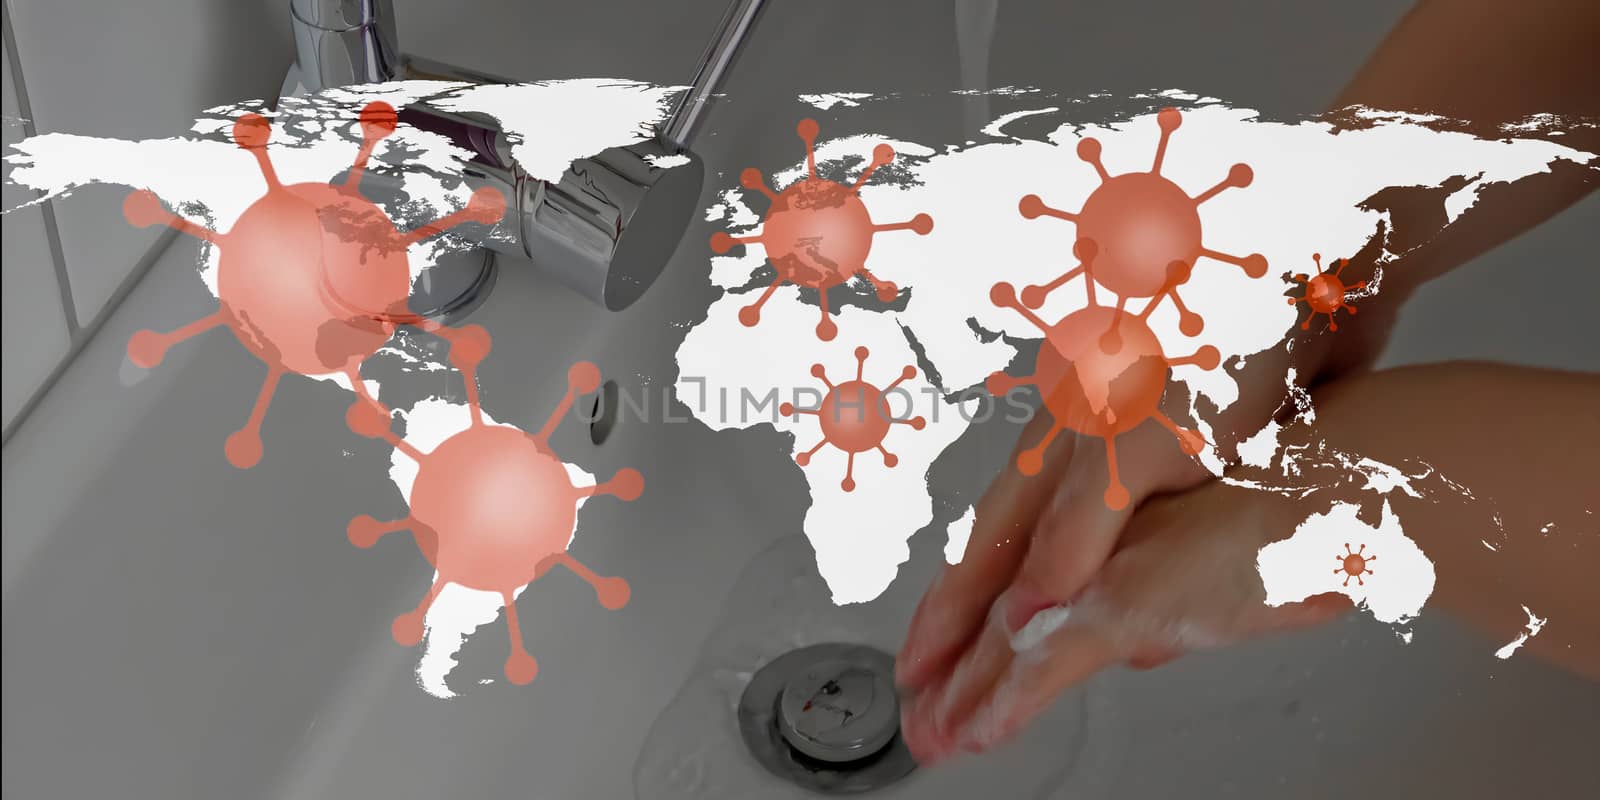 3D-Illustration of a world map showing the corona virus hotspots by MP_foto71